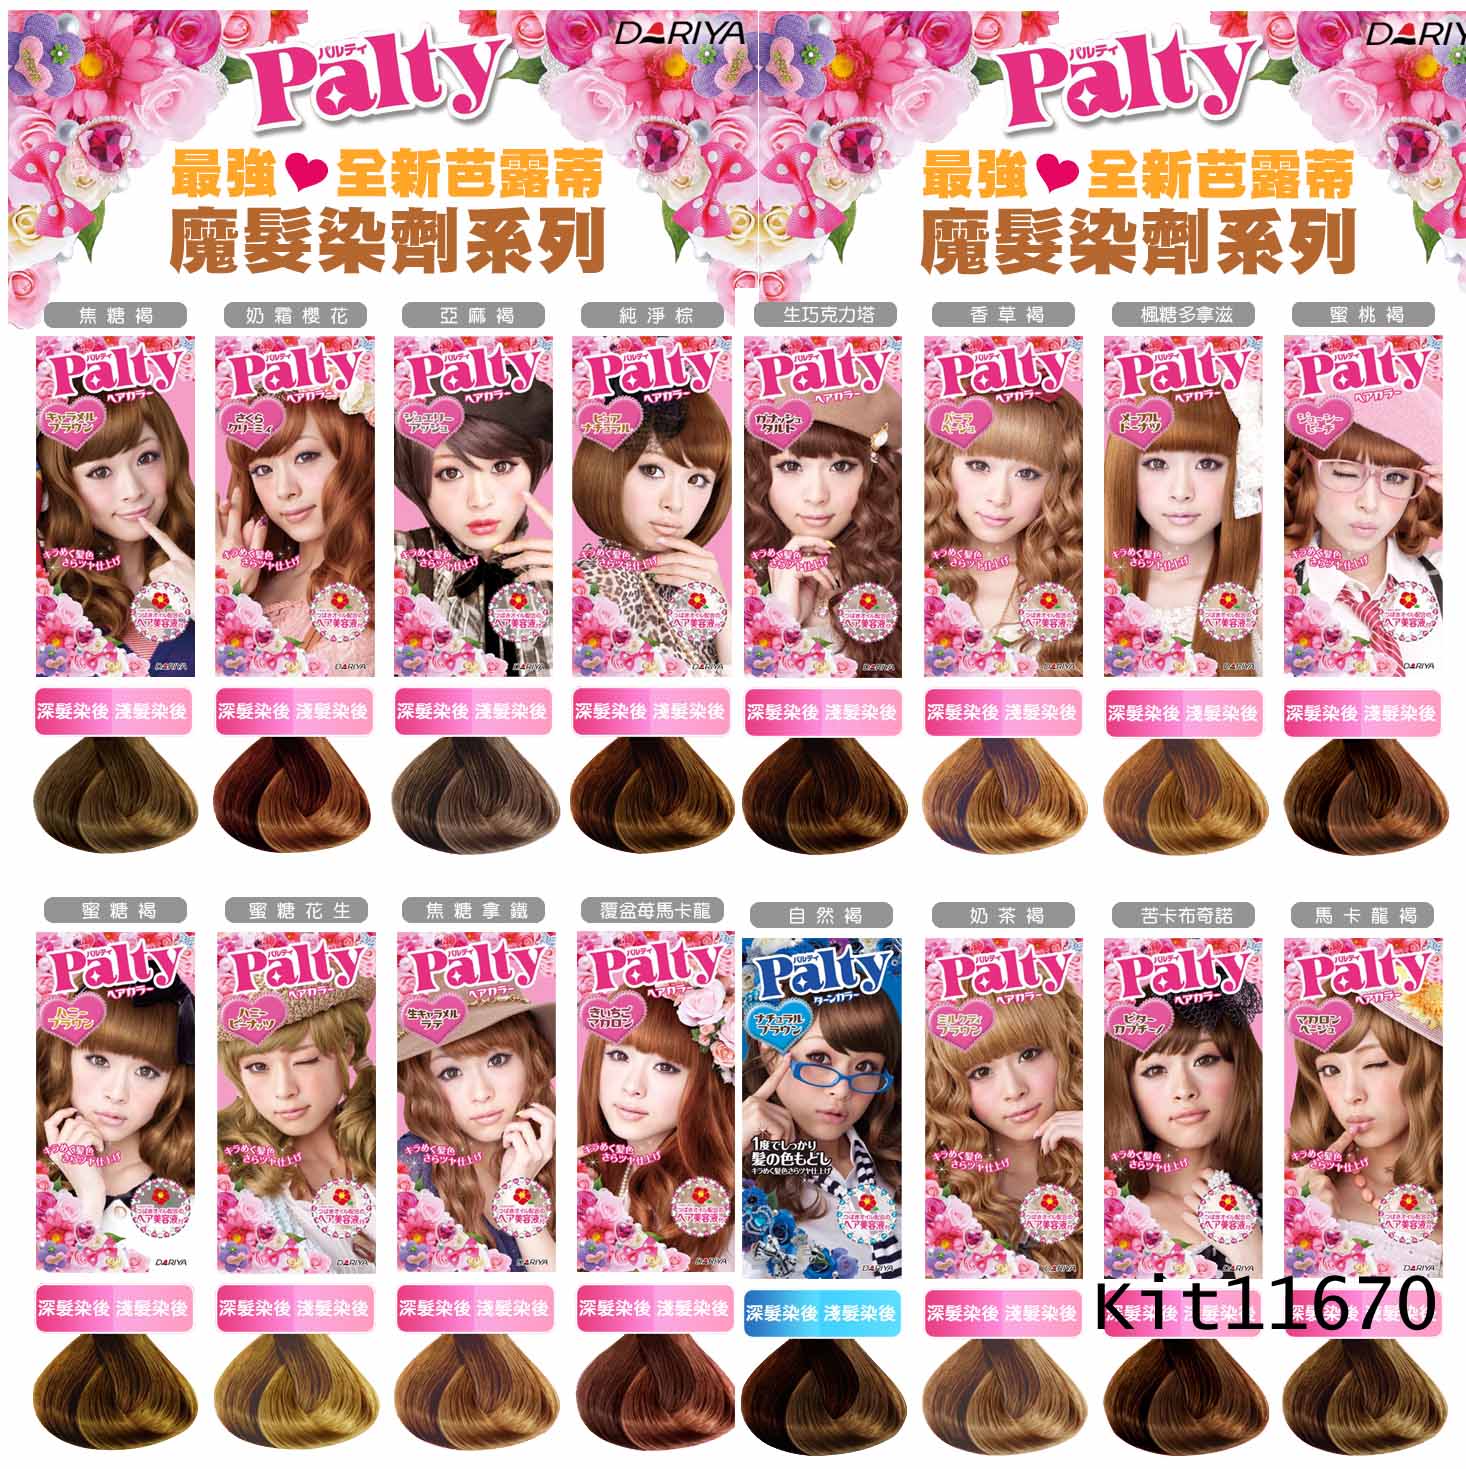 palty hair color photo - 1